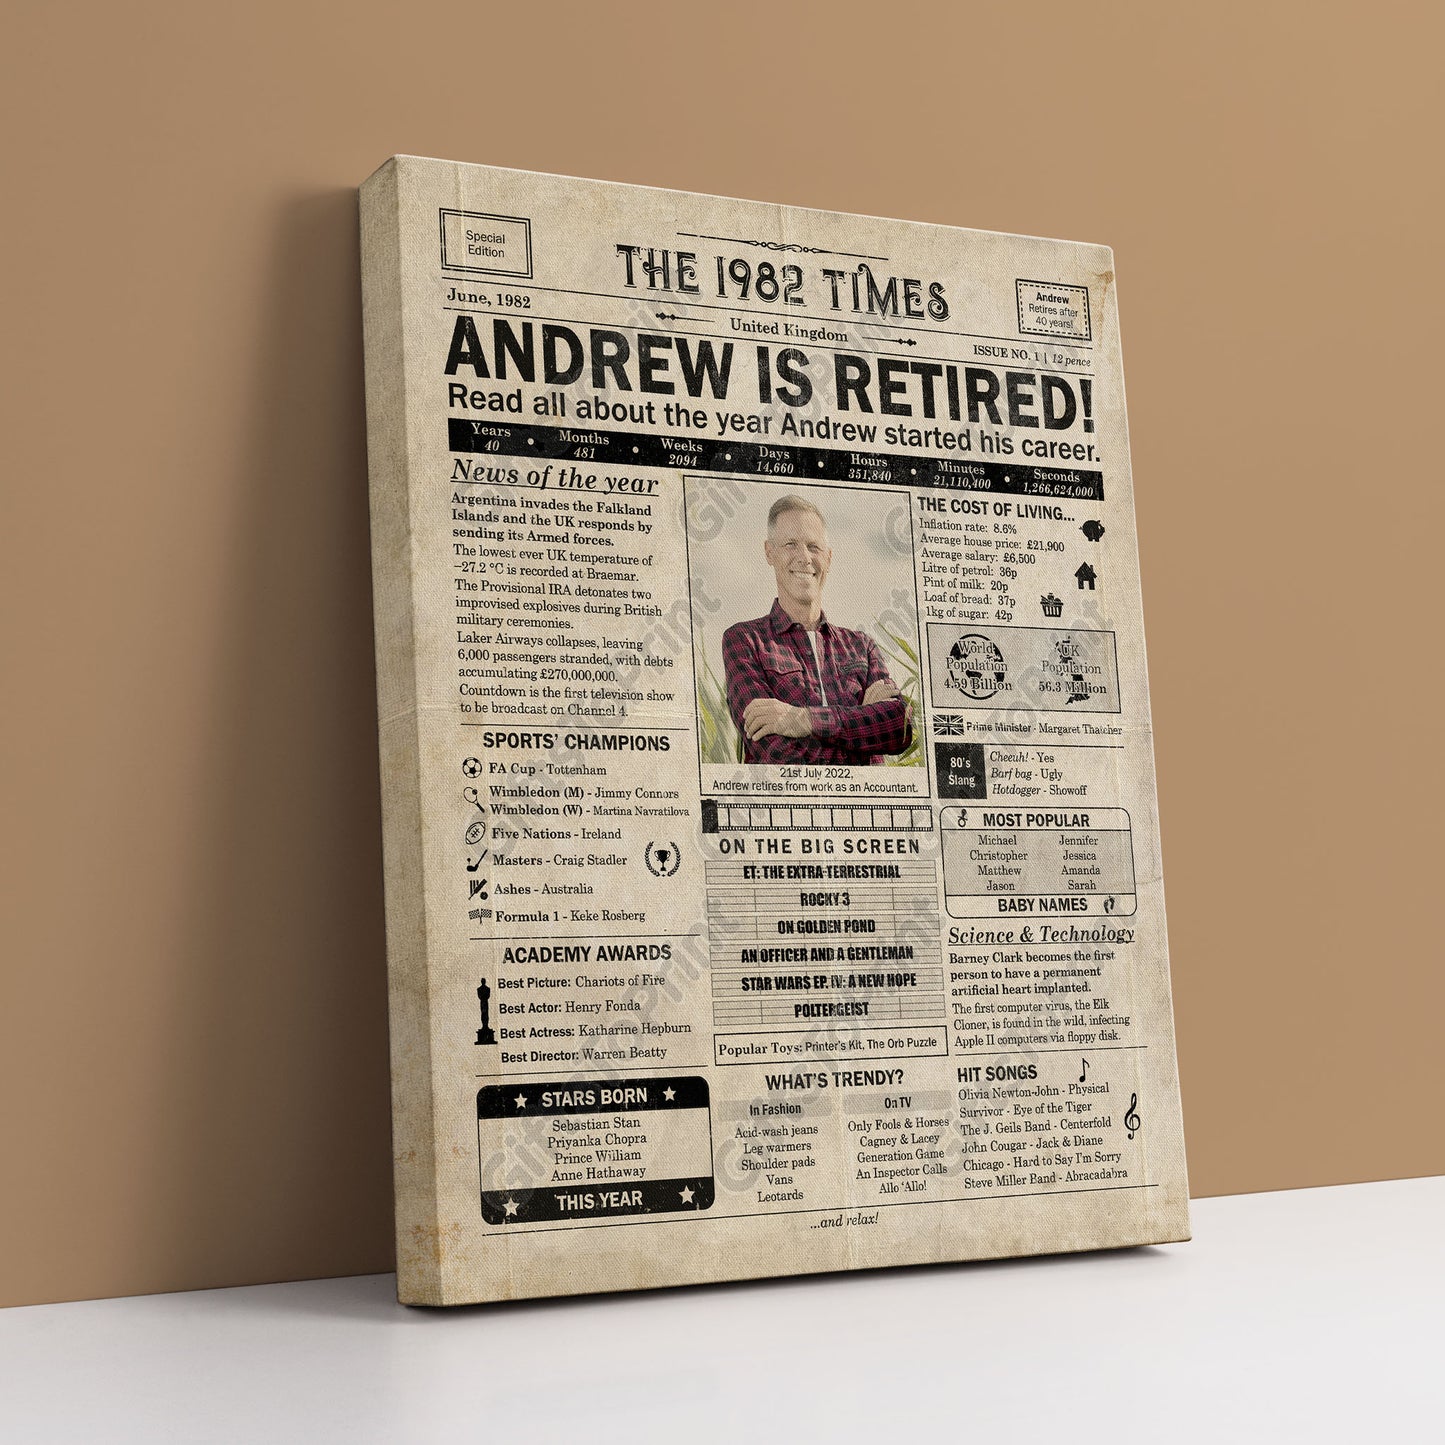 Personalised Retirement Gift: A Printable UK Retirement Poster - Customised for ANY YEAR